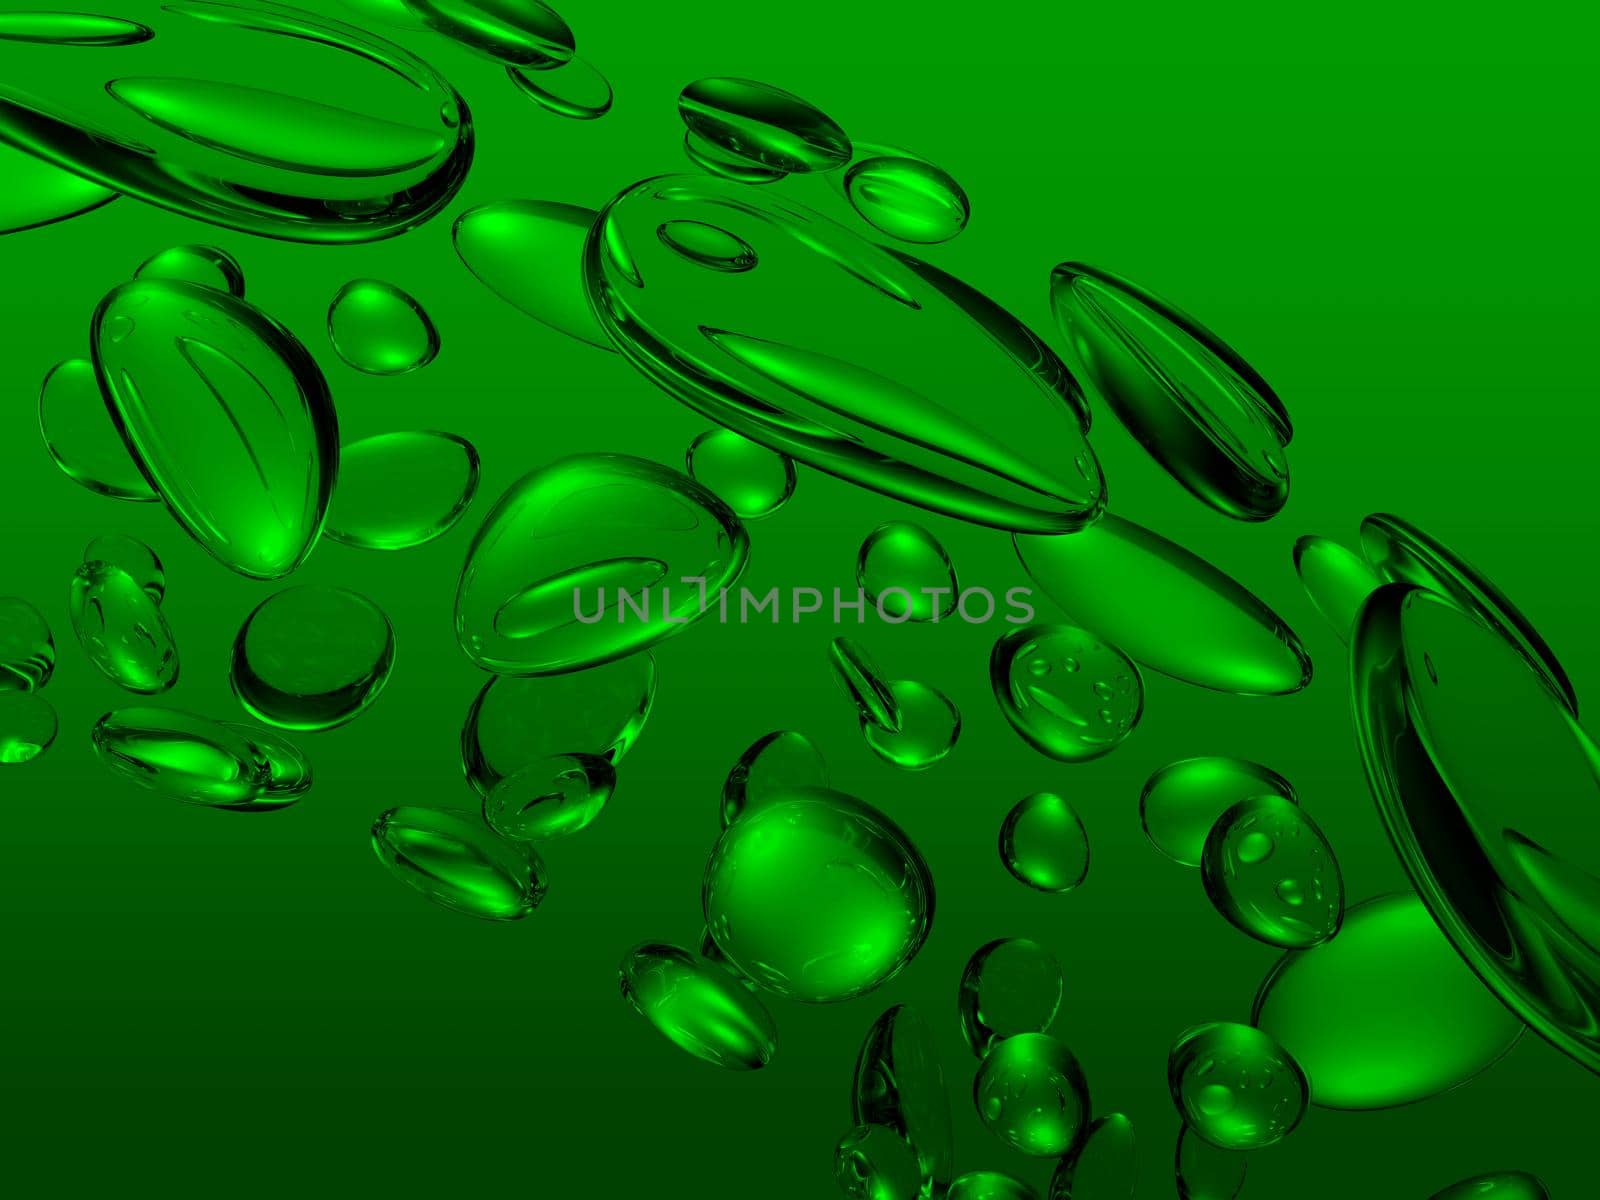 Swirl of water droplets on a green background. Abstract 3D illustration render